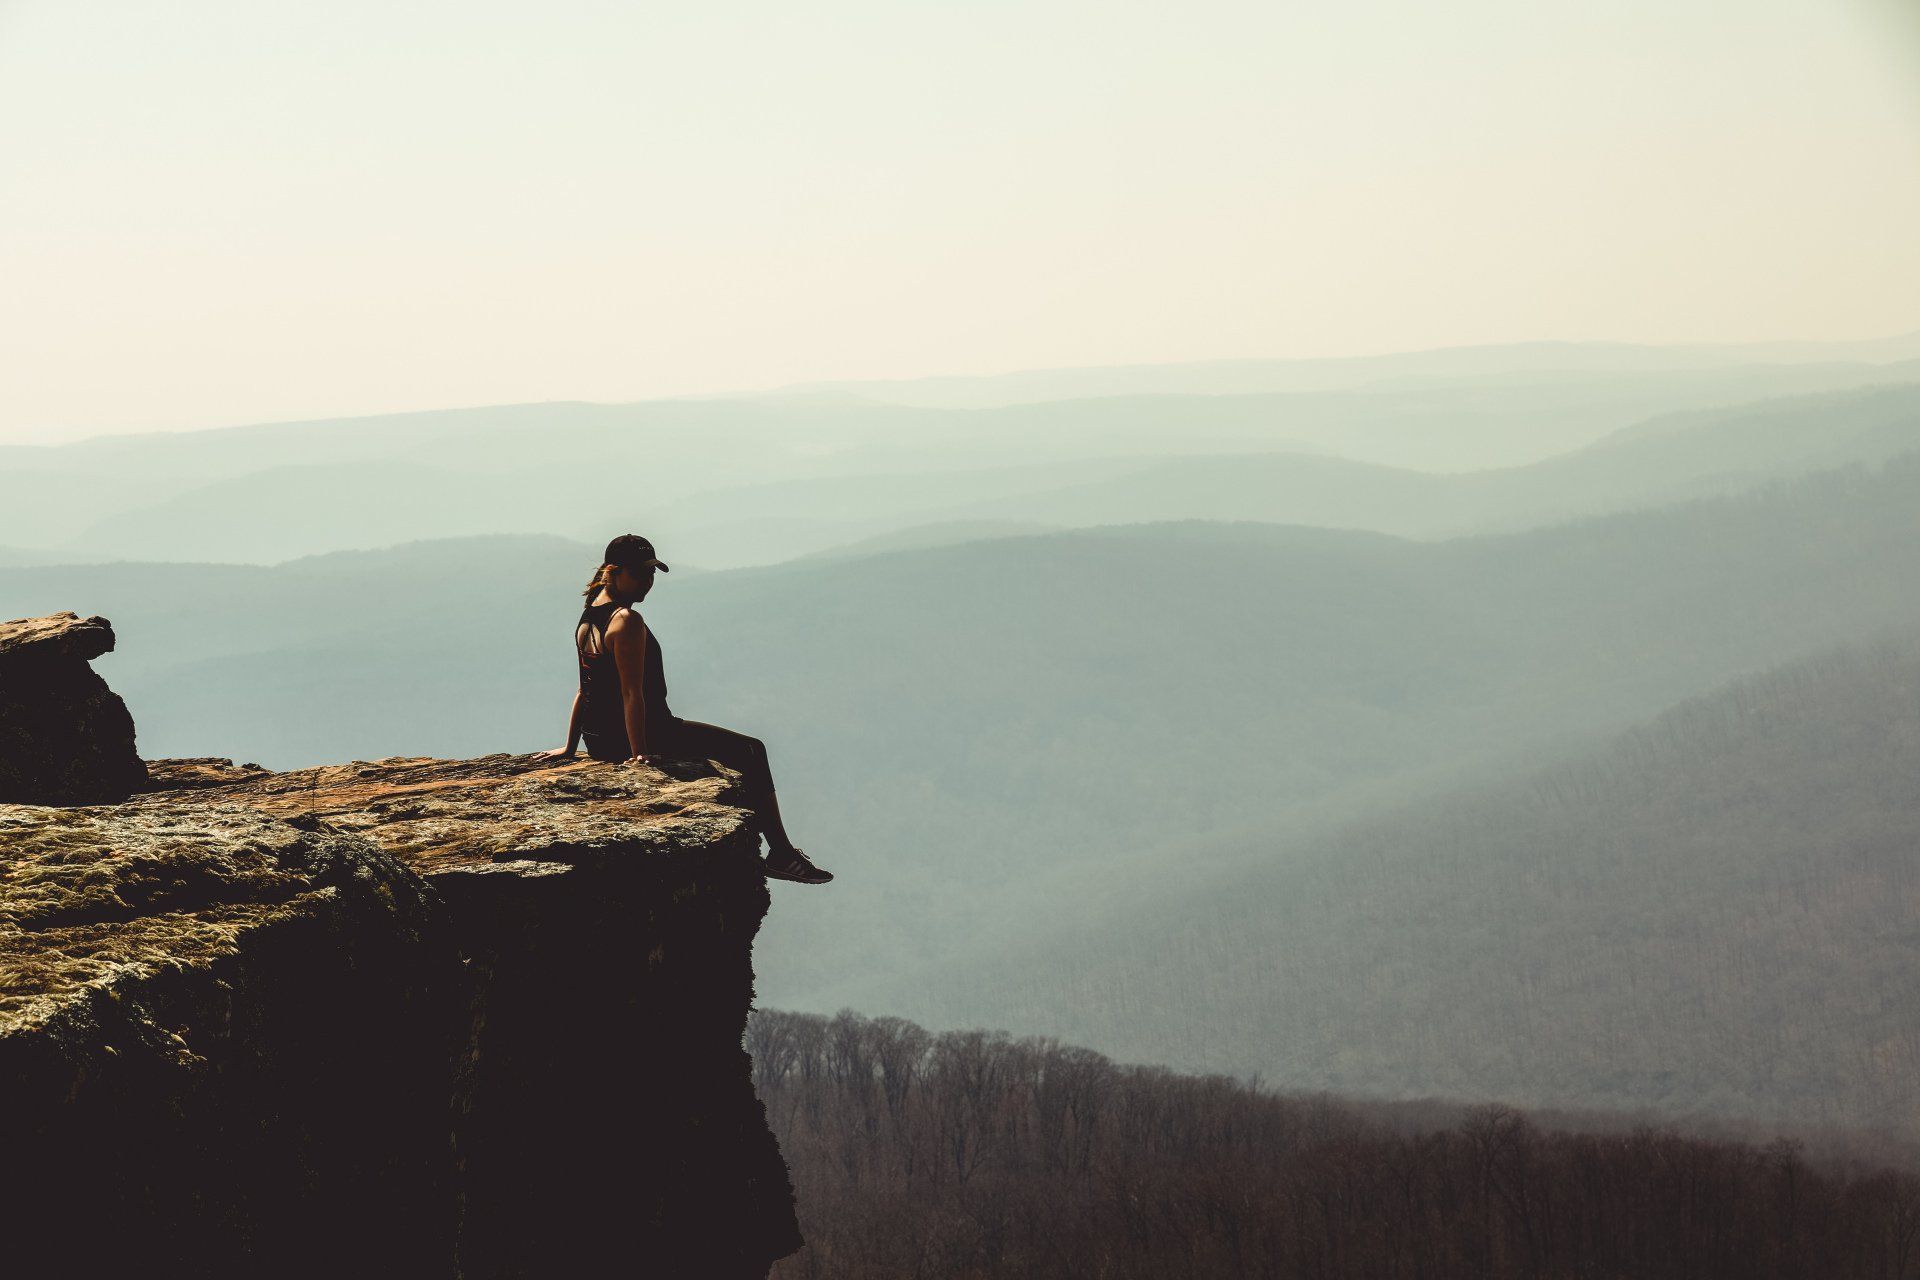 A person is sitting on the edge of a cliff overlooking a mountain range.